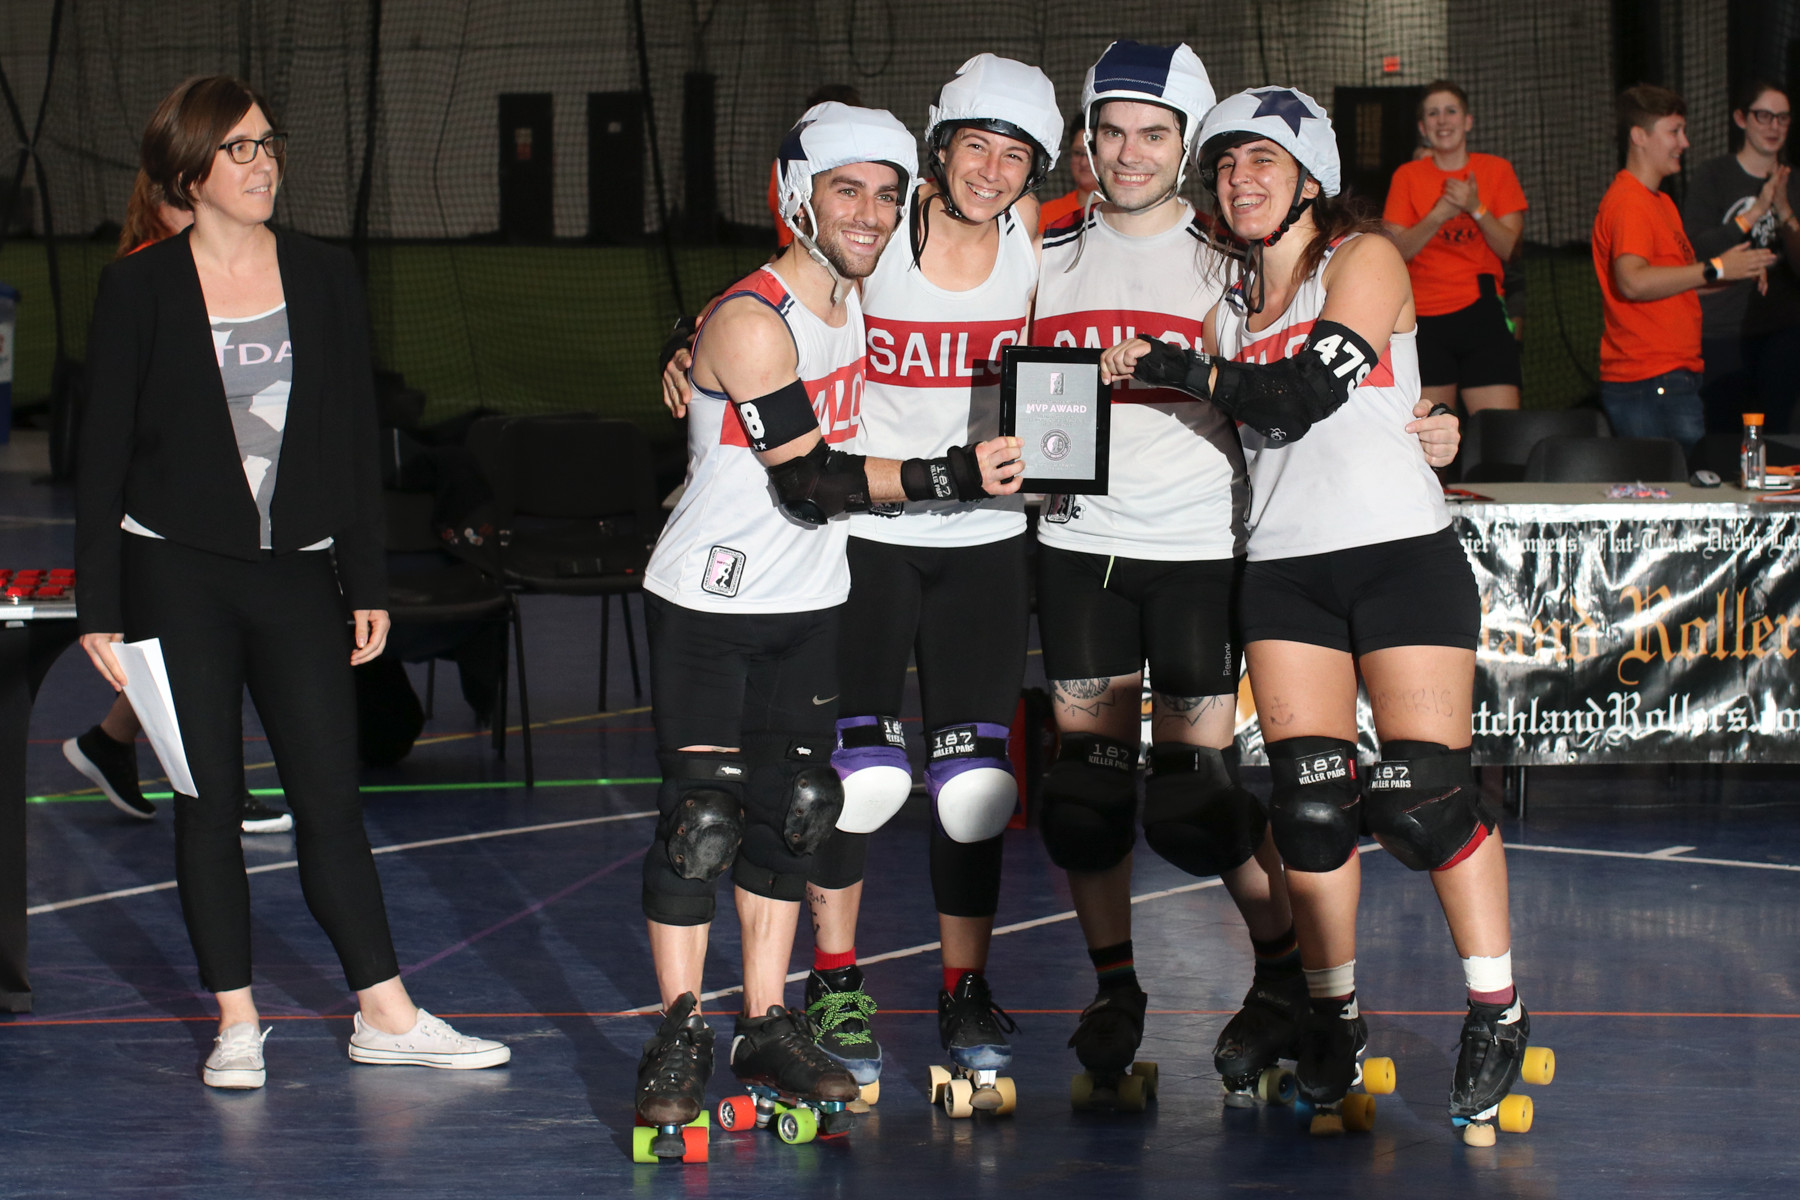 MVP Jules with Sailor City Rollers Jammers